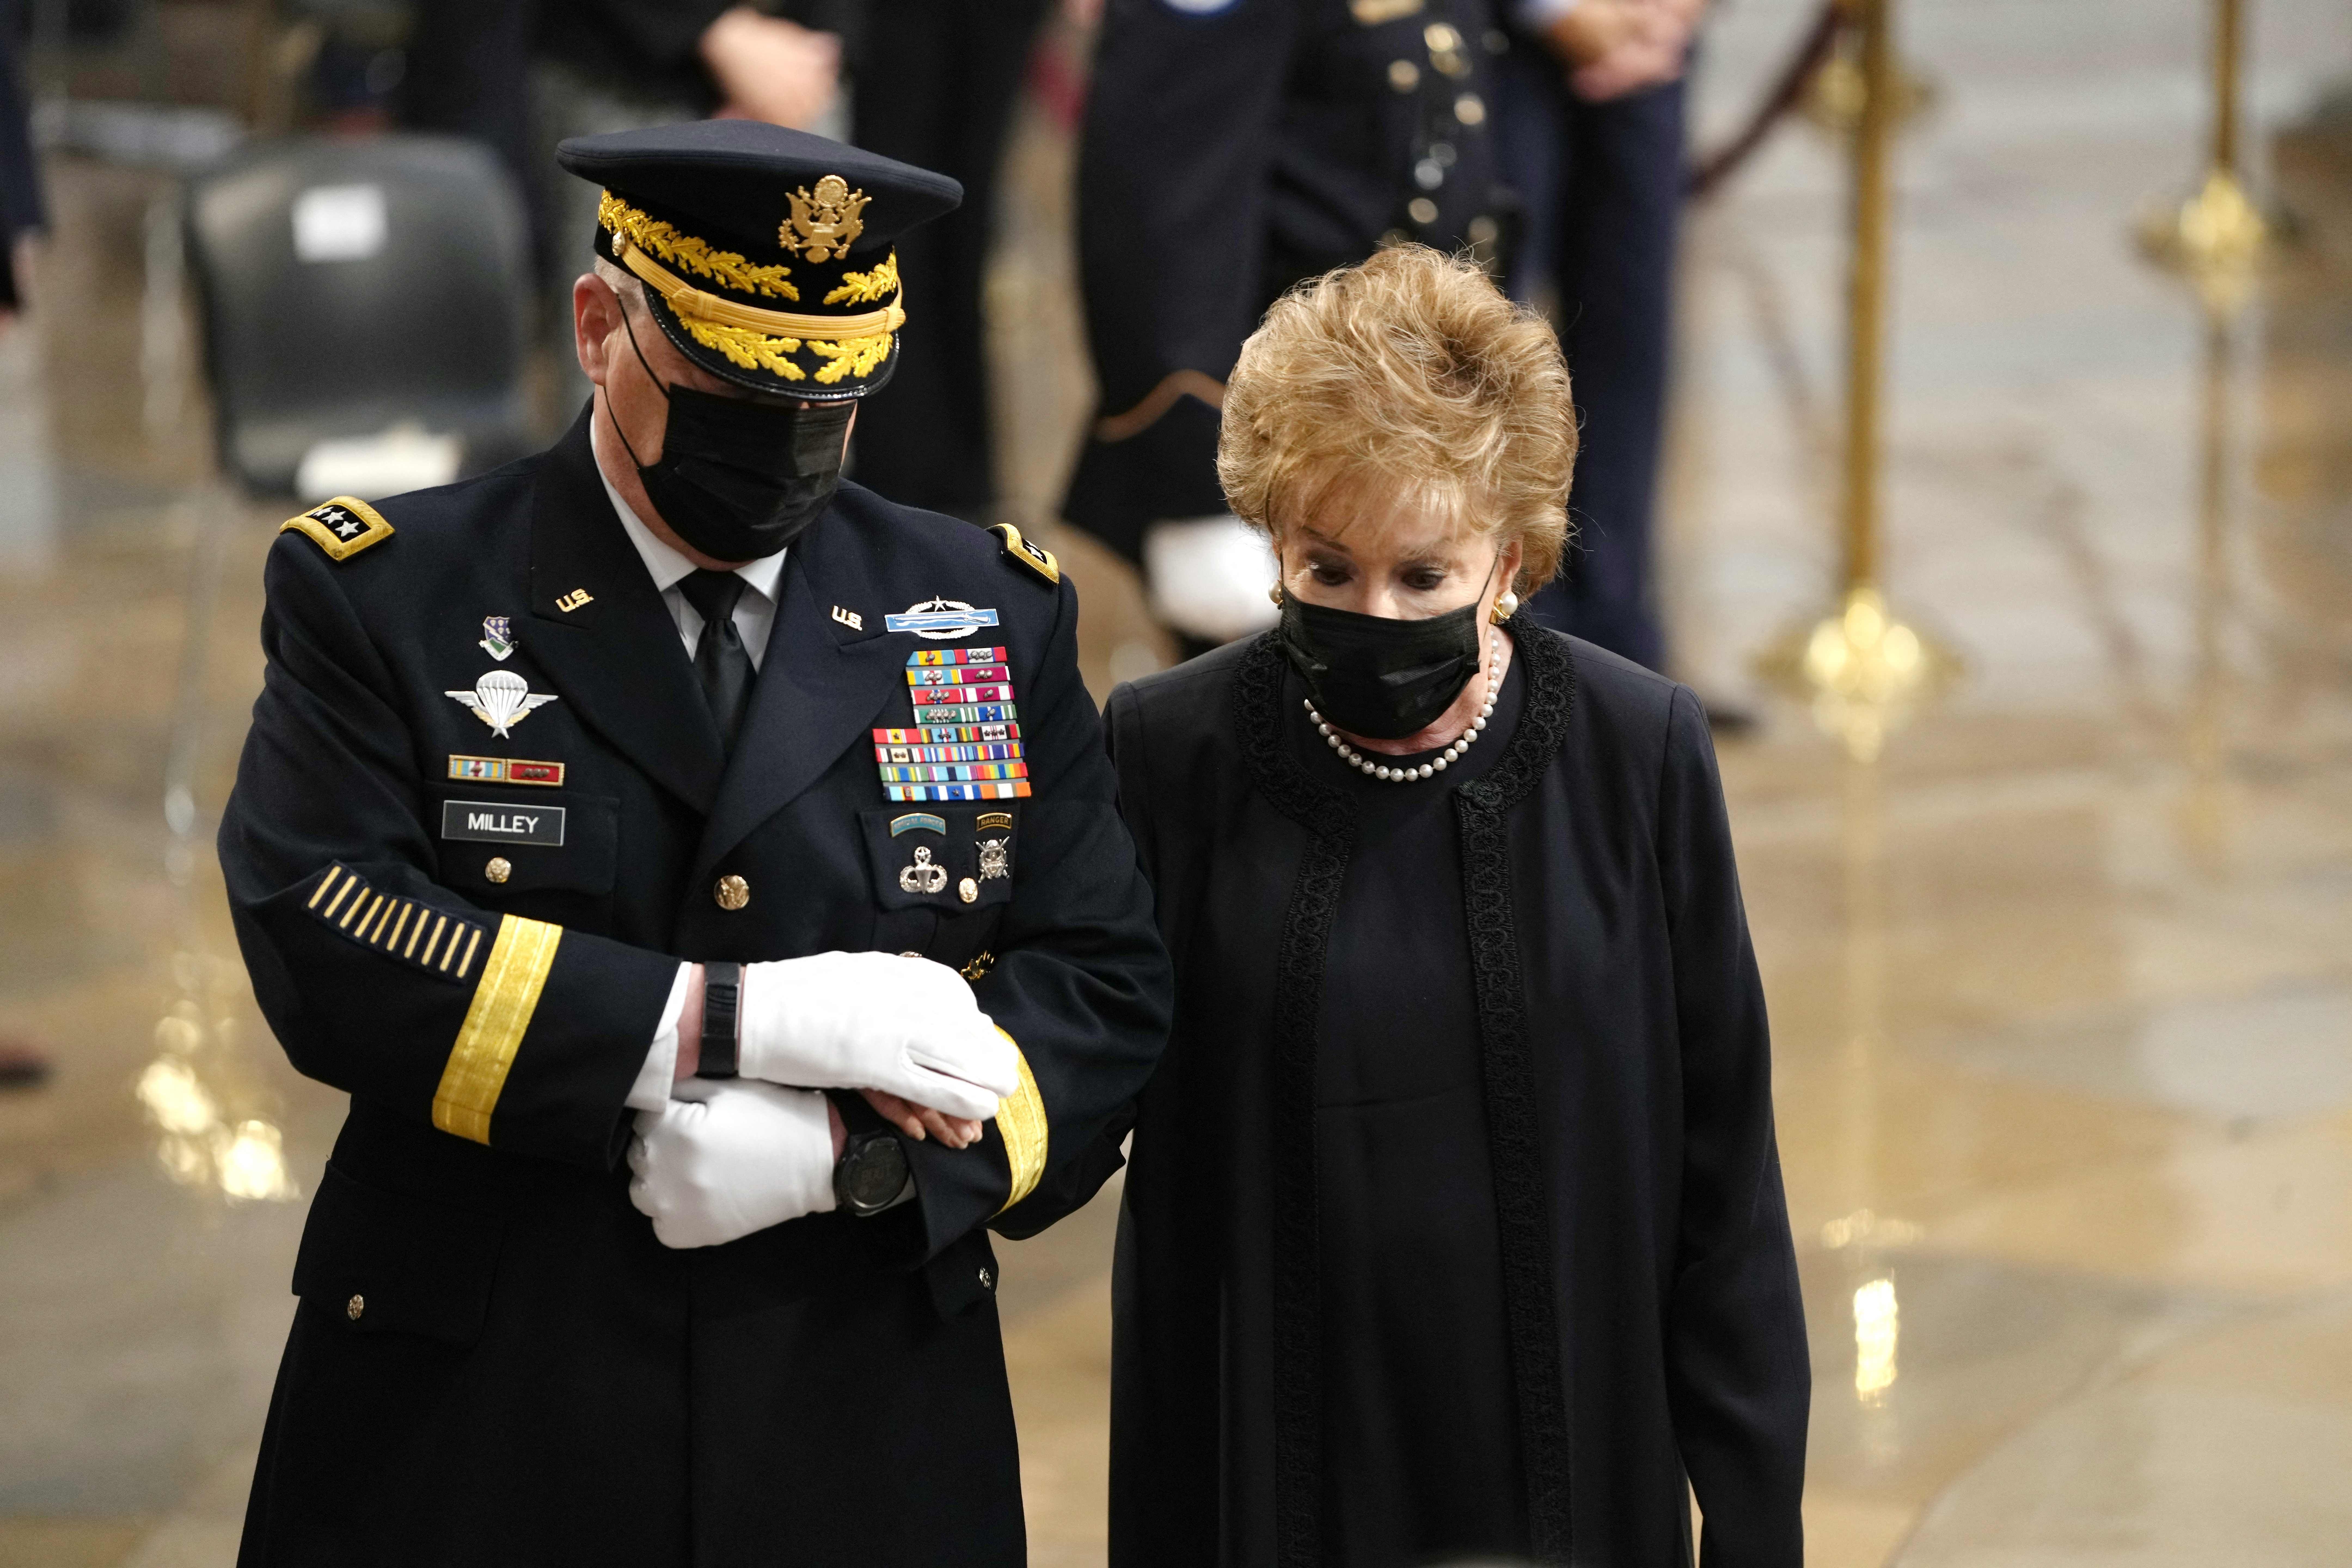 Elizabeth Dole, the wife of Bob Dole, being escorted in the Capitol on Dec. 9.